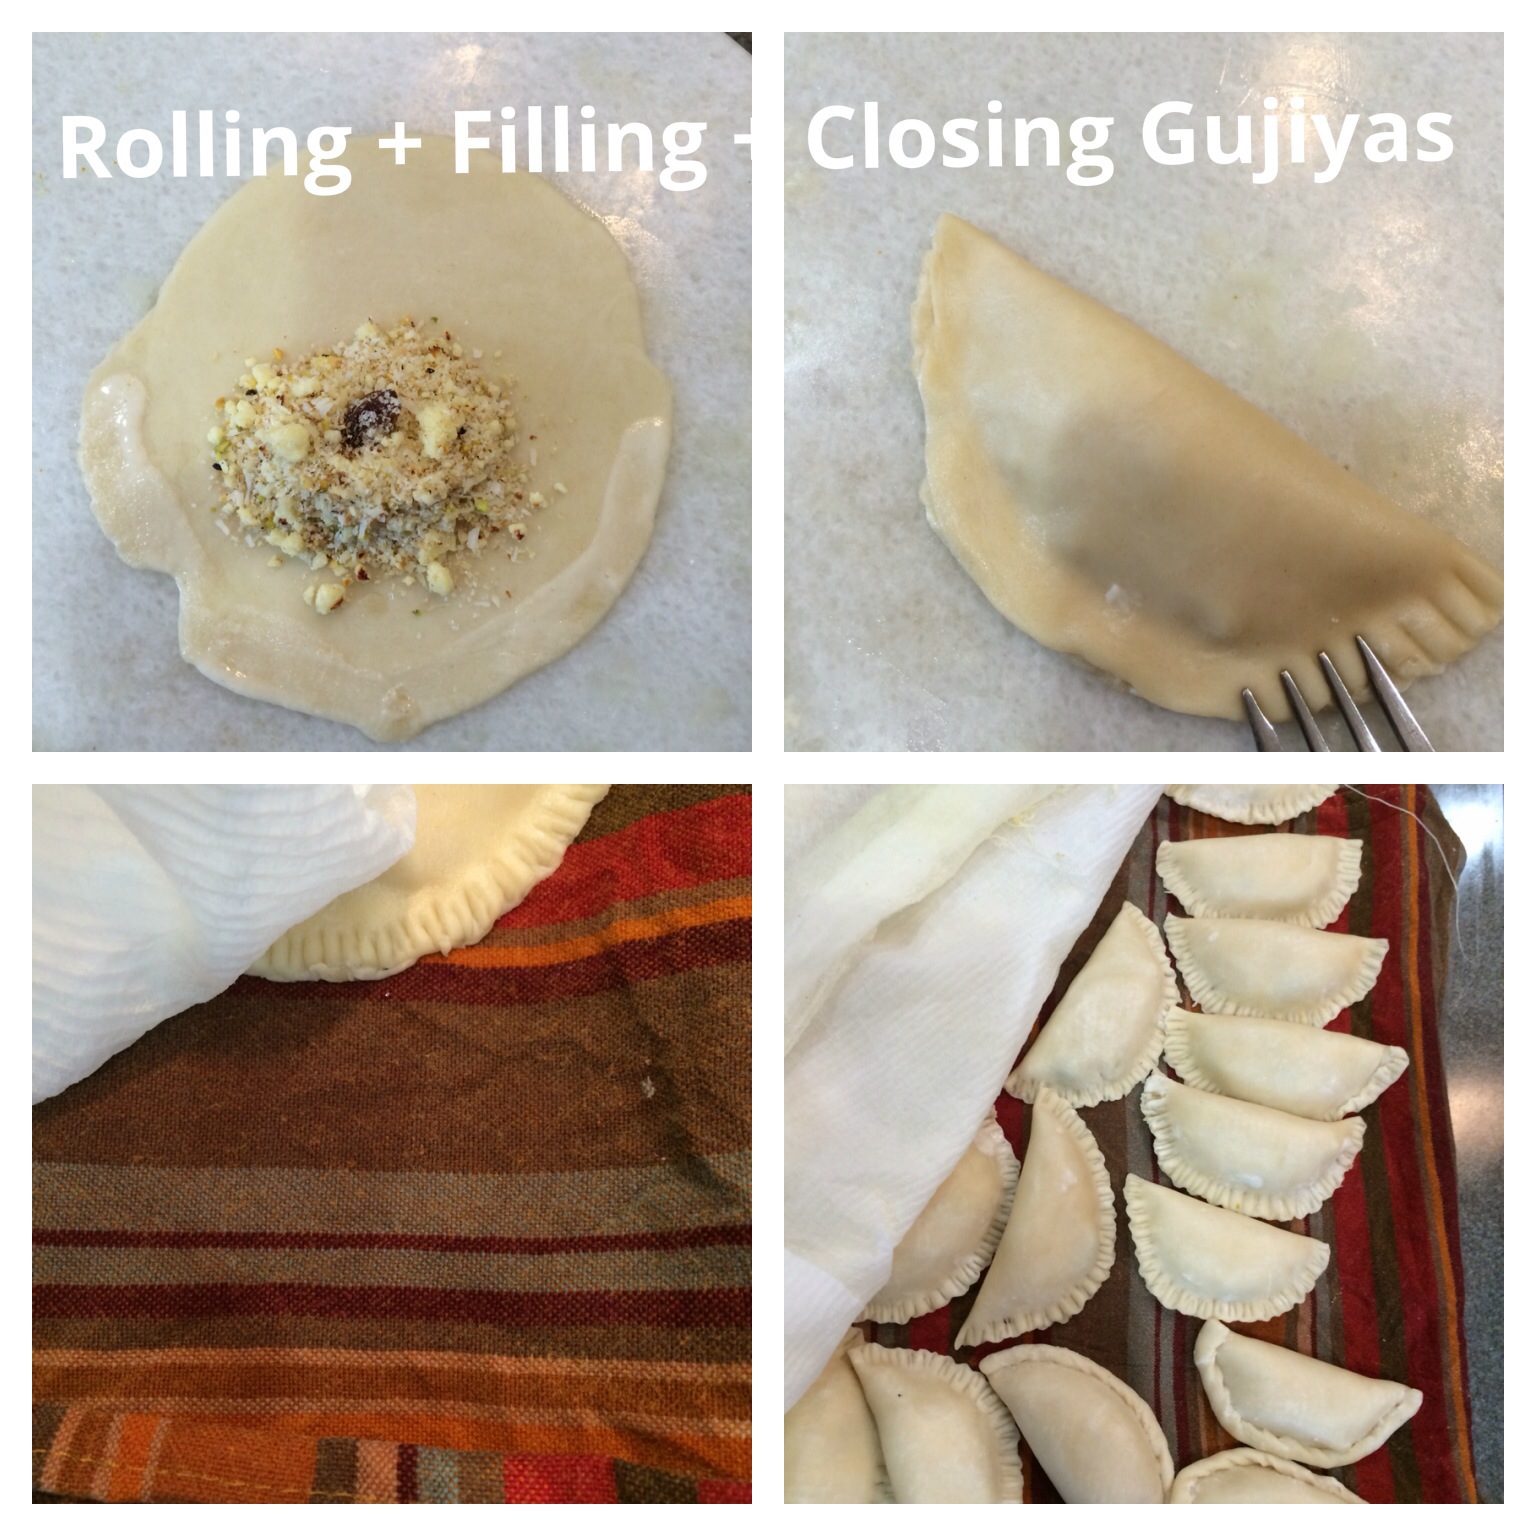 Gujiya is also known as Karanji and is a popular Festival Dessert from India. It is made for Holi and Diwali. It is like empanada or hand pies. The filling has milk solids and nuts. #gujiya #gujia #karanji #handpies #empanadas #holidessert #diwalidessert #indiandessert #holirecipes